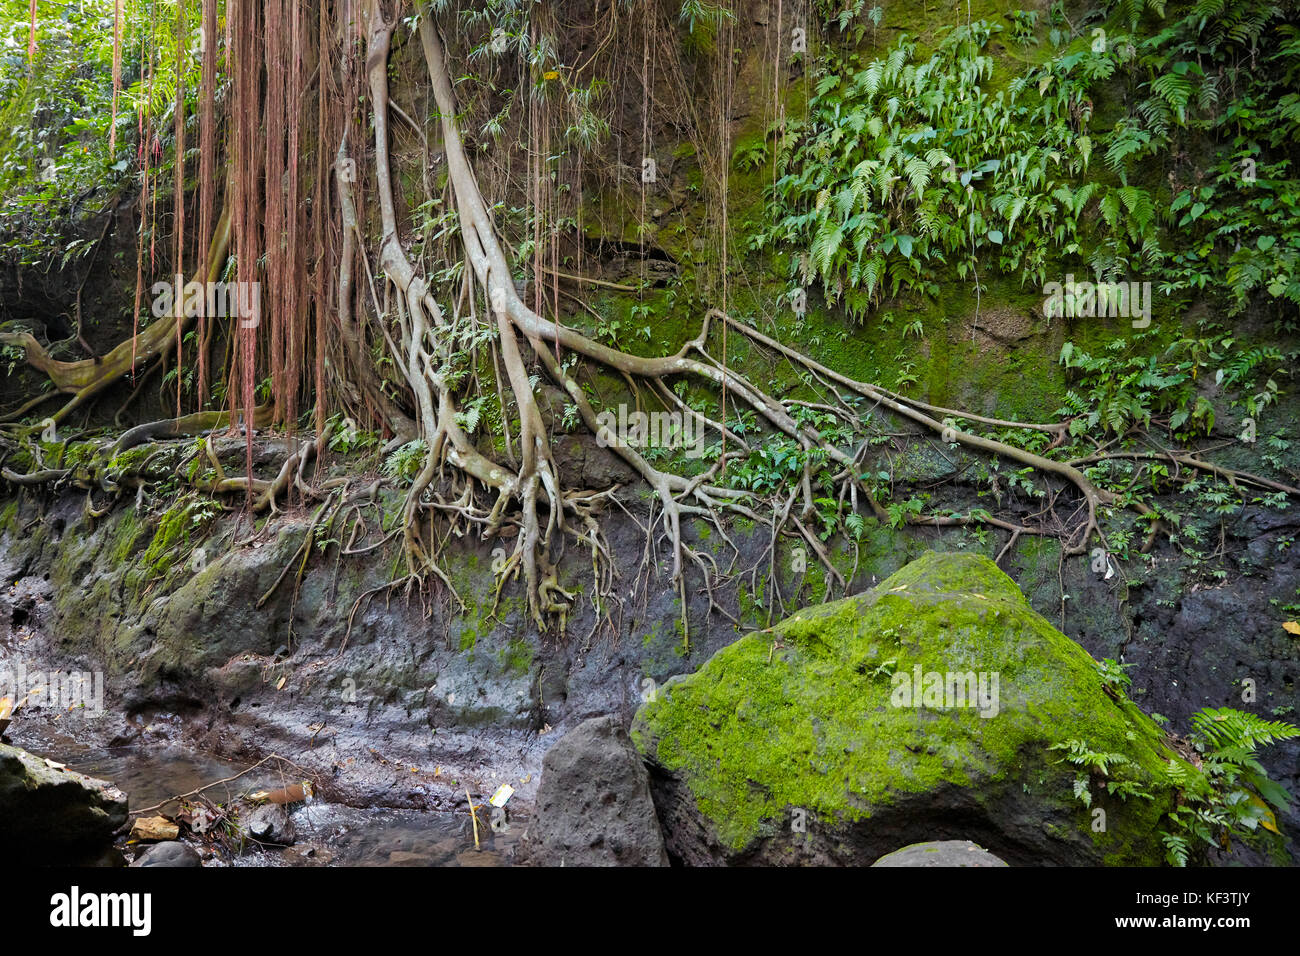 Aerial roots in the Sacred Monkey Forest Sanctuary. Ubud, Bali, Indonesia. Stock Photo